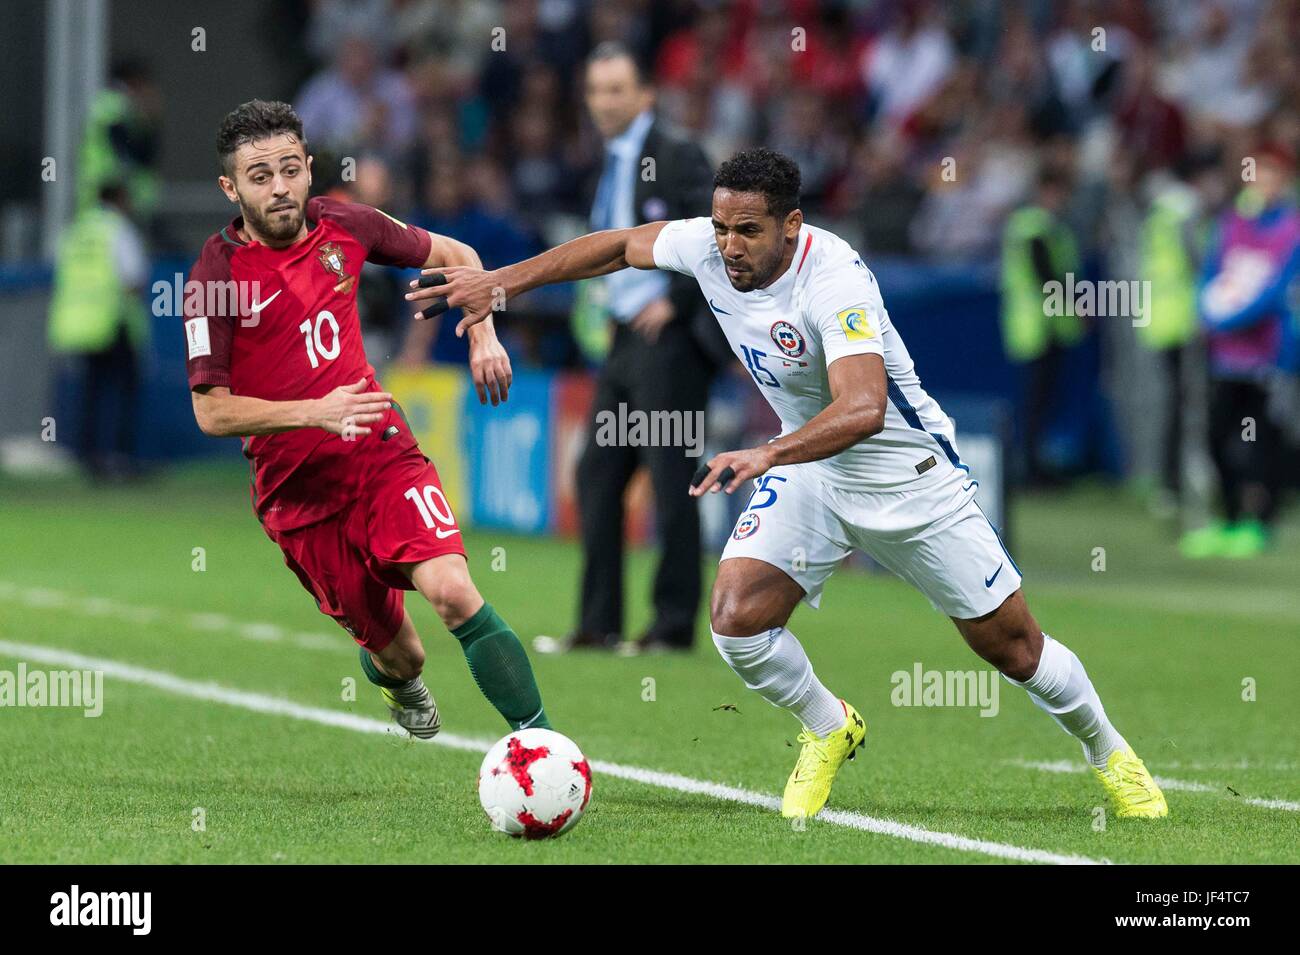 Kazan, Russia. 28th June, 2017. Jean Beausejour (R) of Chile vies for the ball with Bernardo Silva of Portugal during the FIFA Confederations Cup 2017 semifinal match in Kazan, Russia, June 28, 2017. Credit: Evgeny Sinitsyn/Xinhua/Alamy Live News Stock Photo